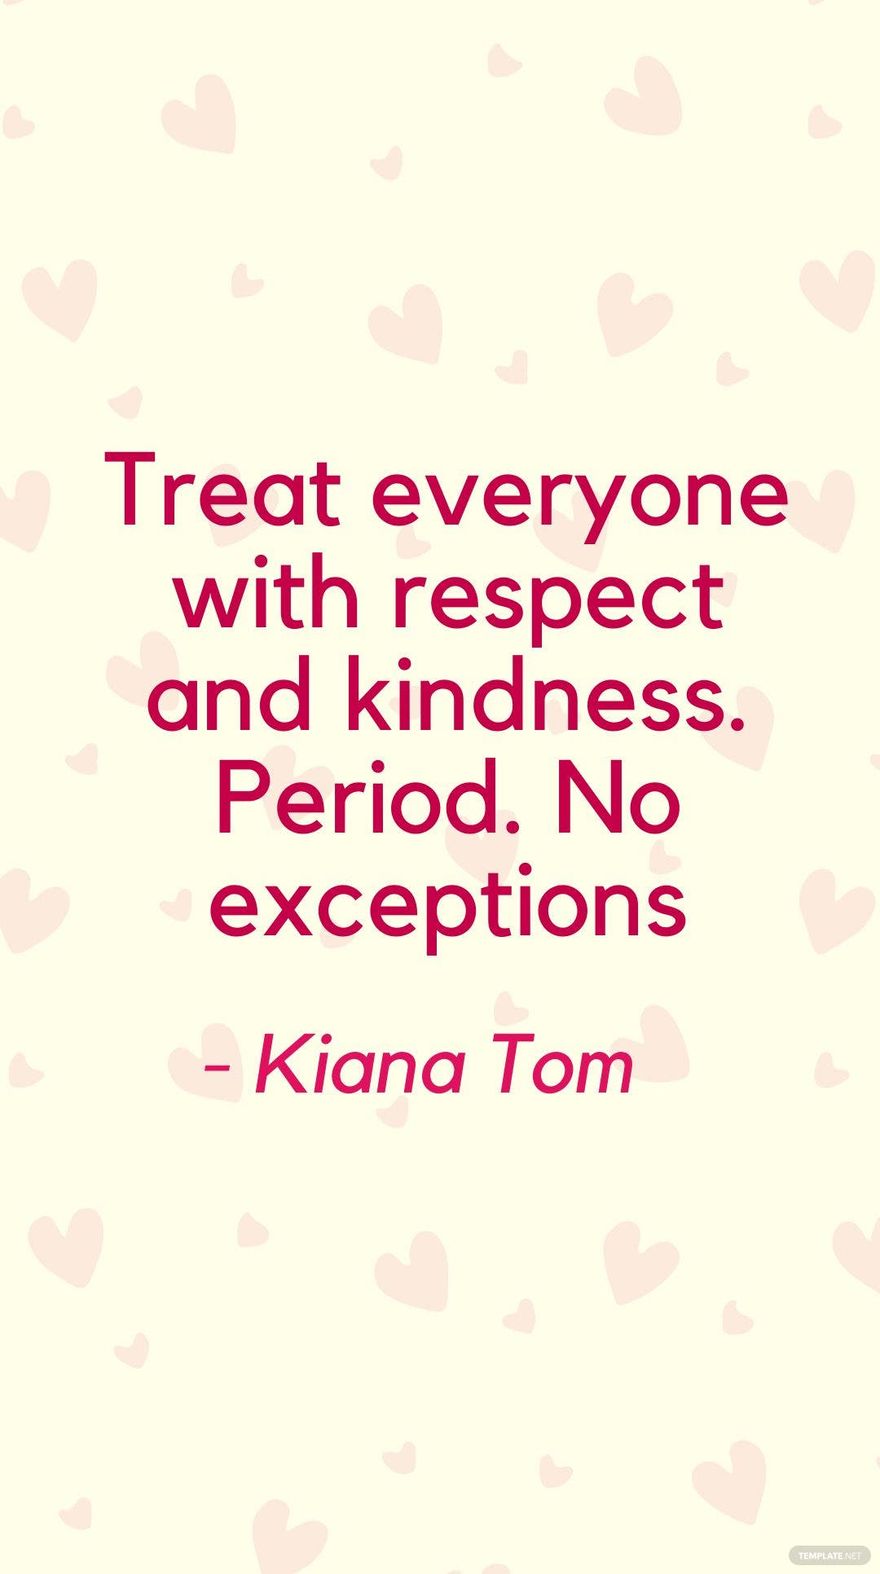 Kiana Tom - Treat everyone with respect and kindness. Period. No exceptions